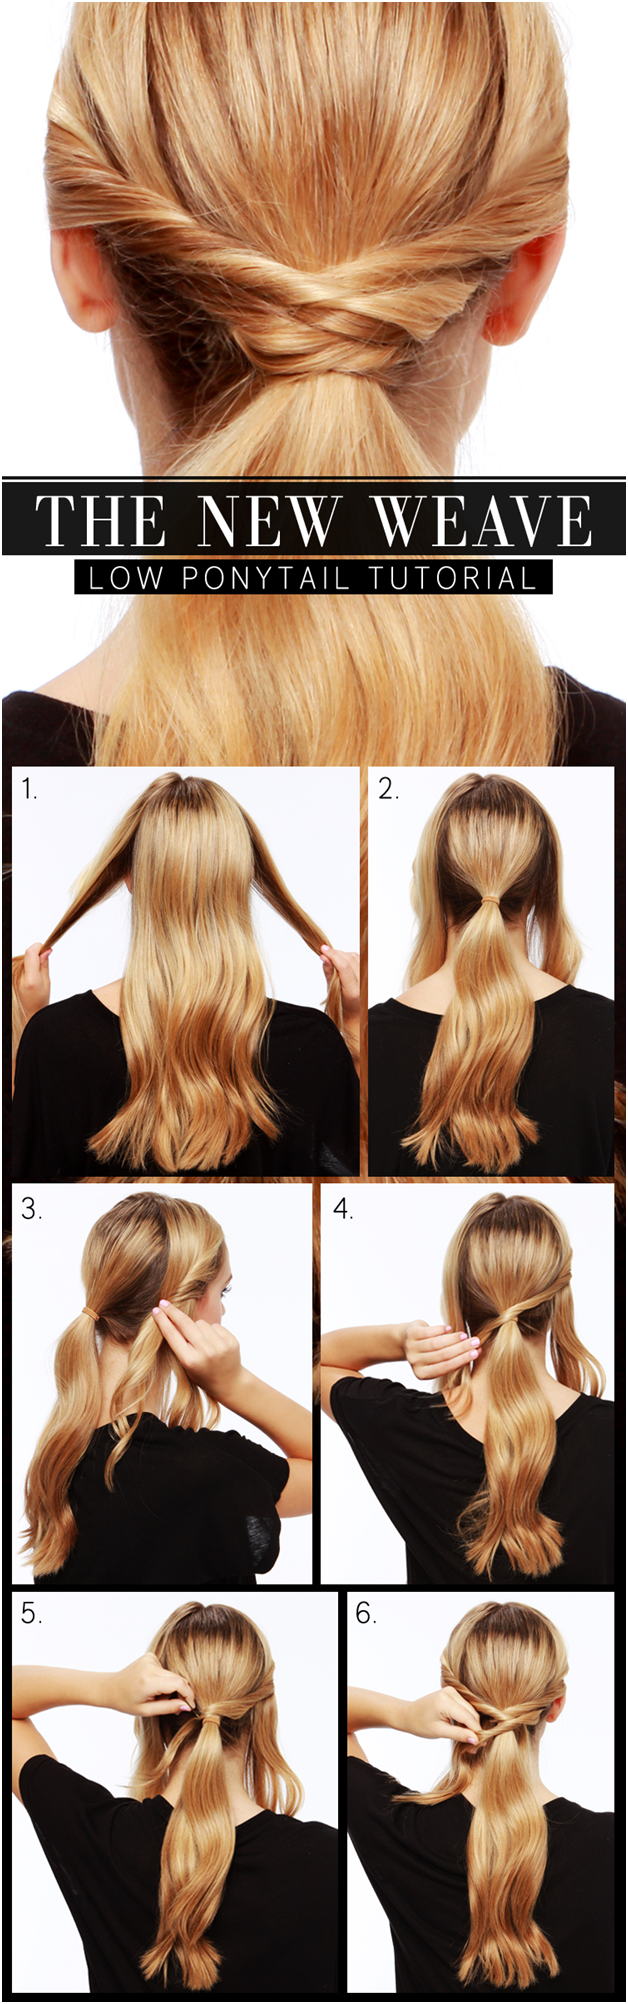 weaved-styled-low-ponytail